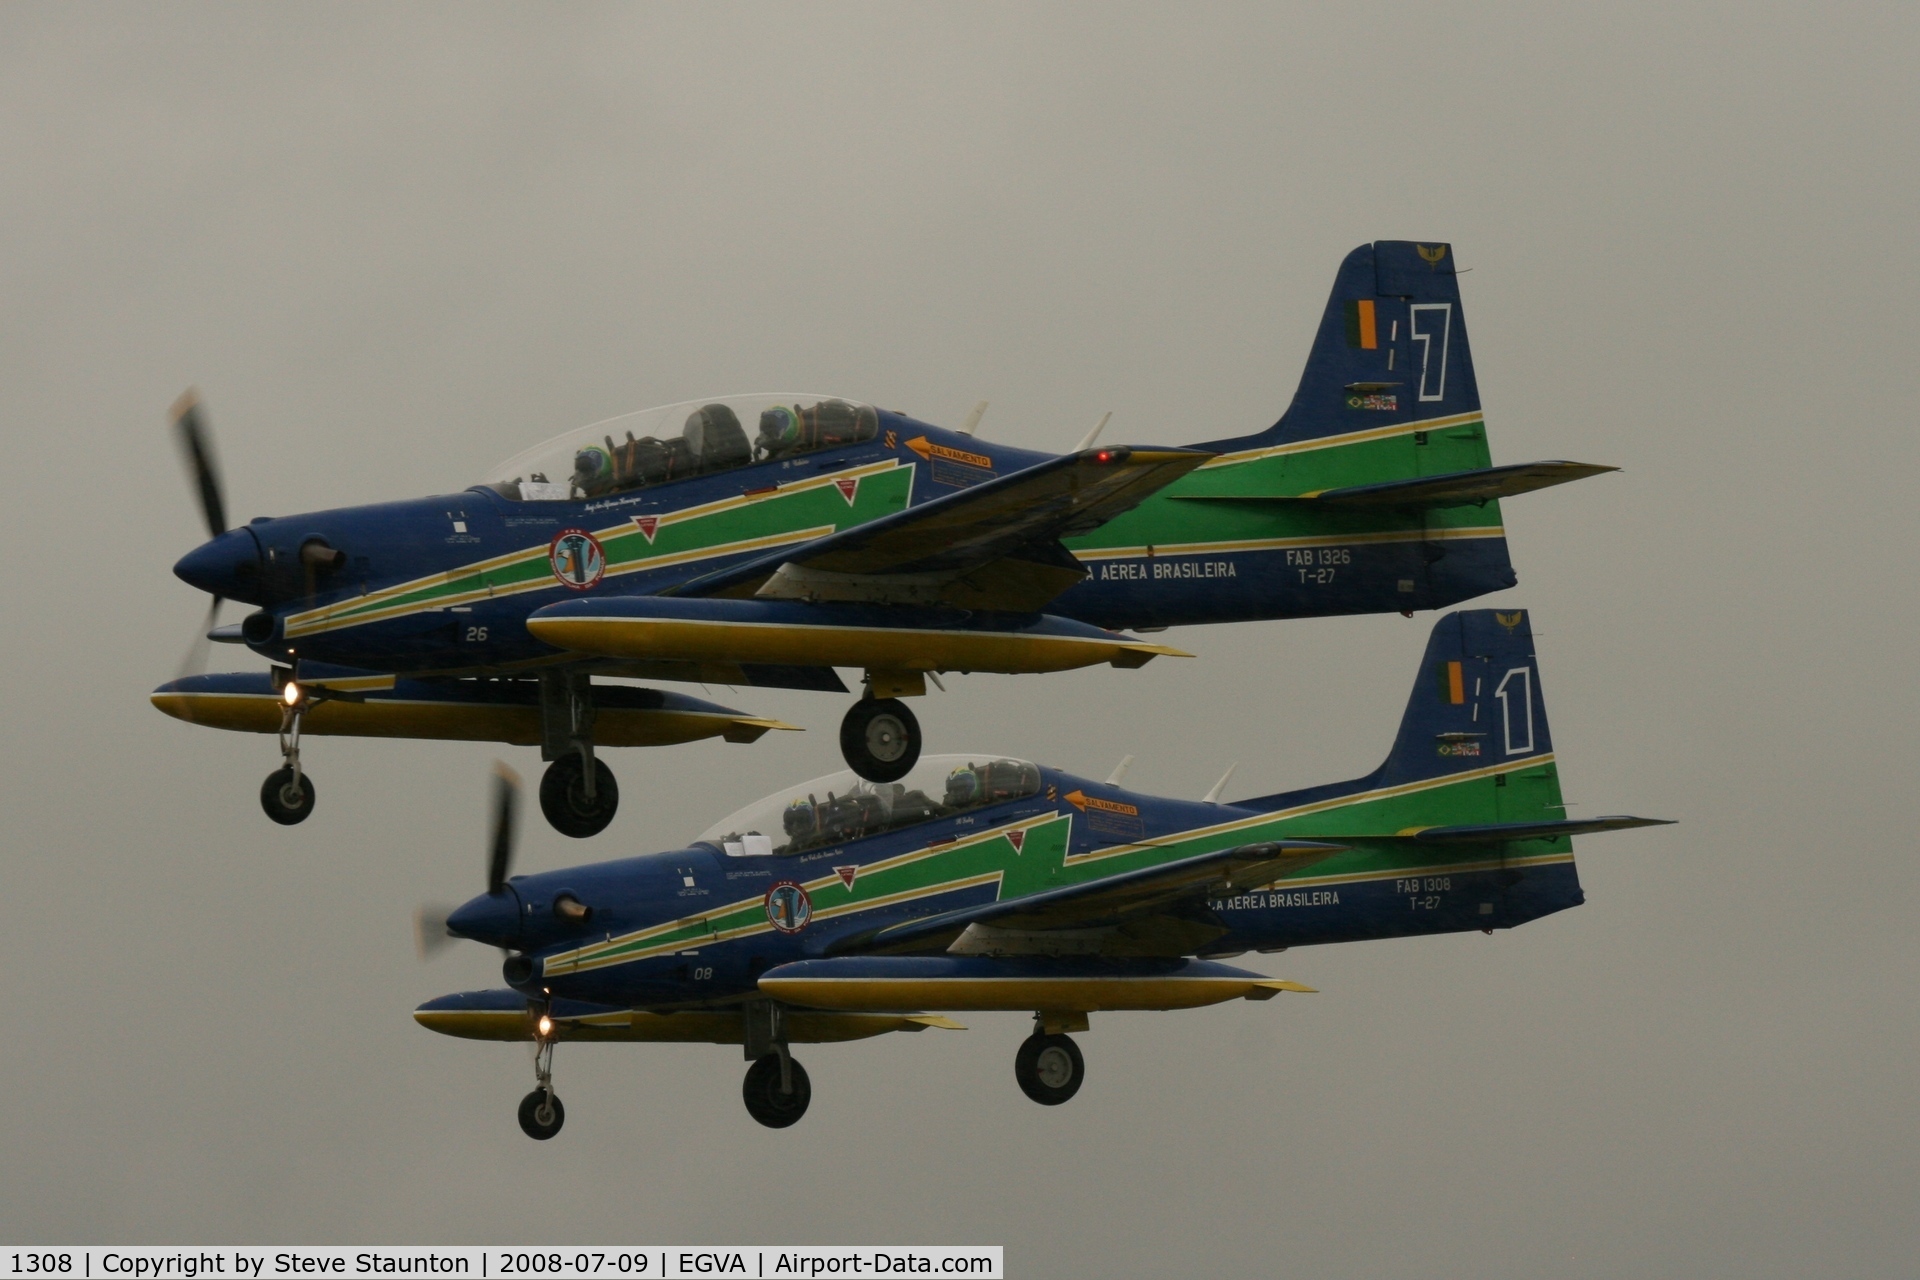 1308, Embraer T-27 Tucano (EMB-312) C/N 312012, Taken at the Royal International Air Tattoo 2008 during arrivals and departures (show days cancelled due to bad weather)